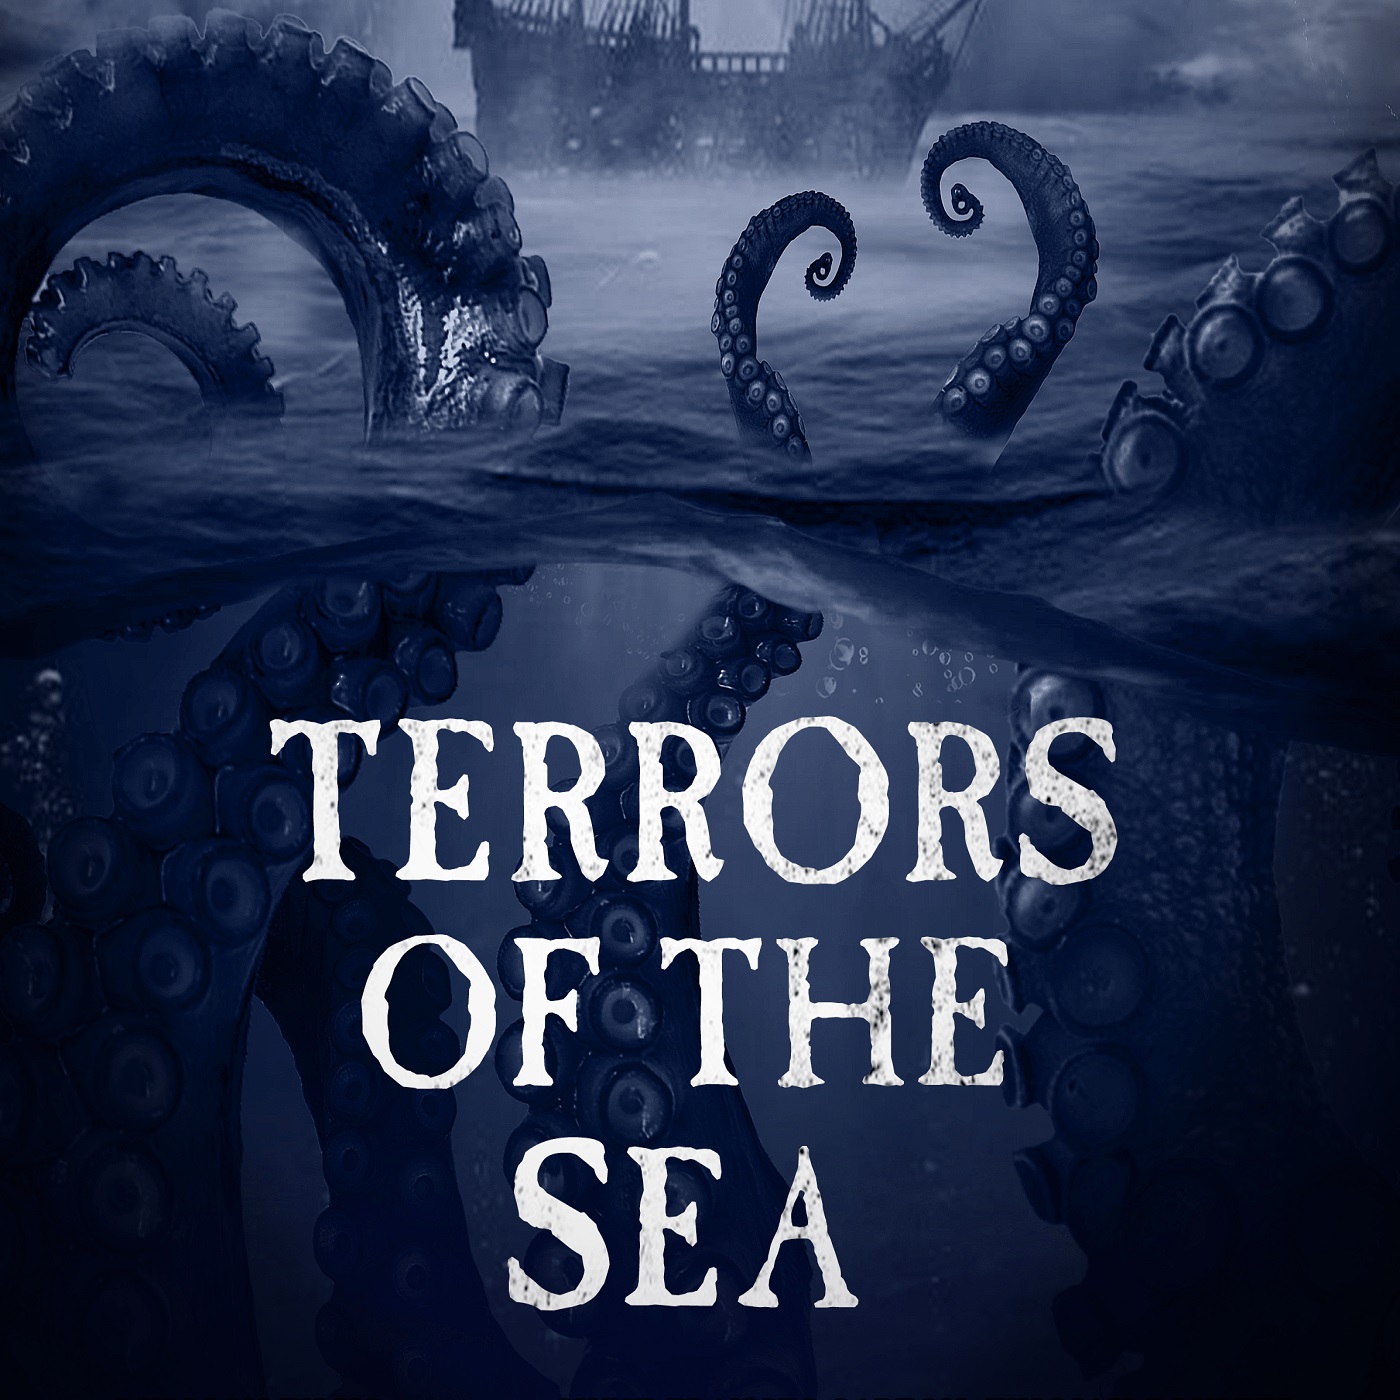 Terrors of the Sea - with Sideworld